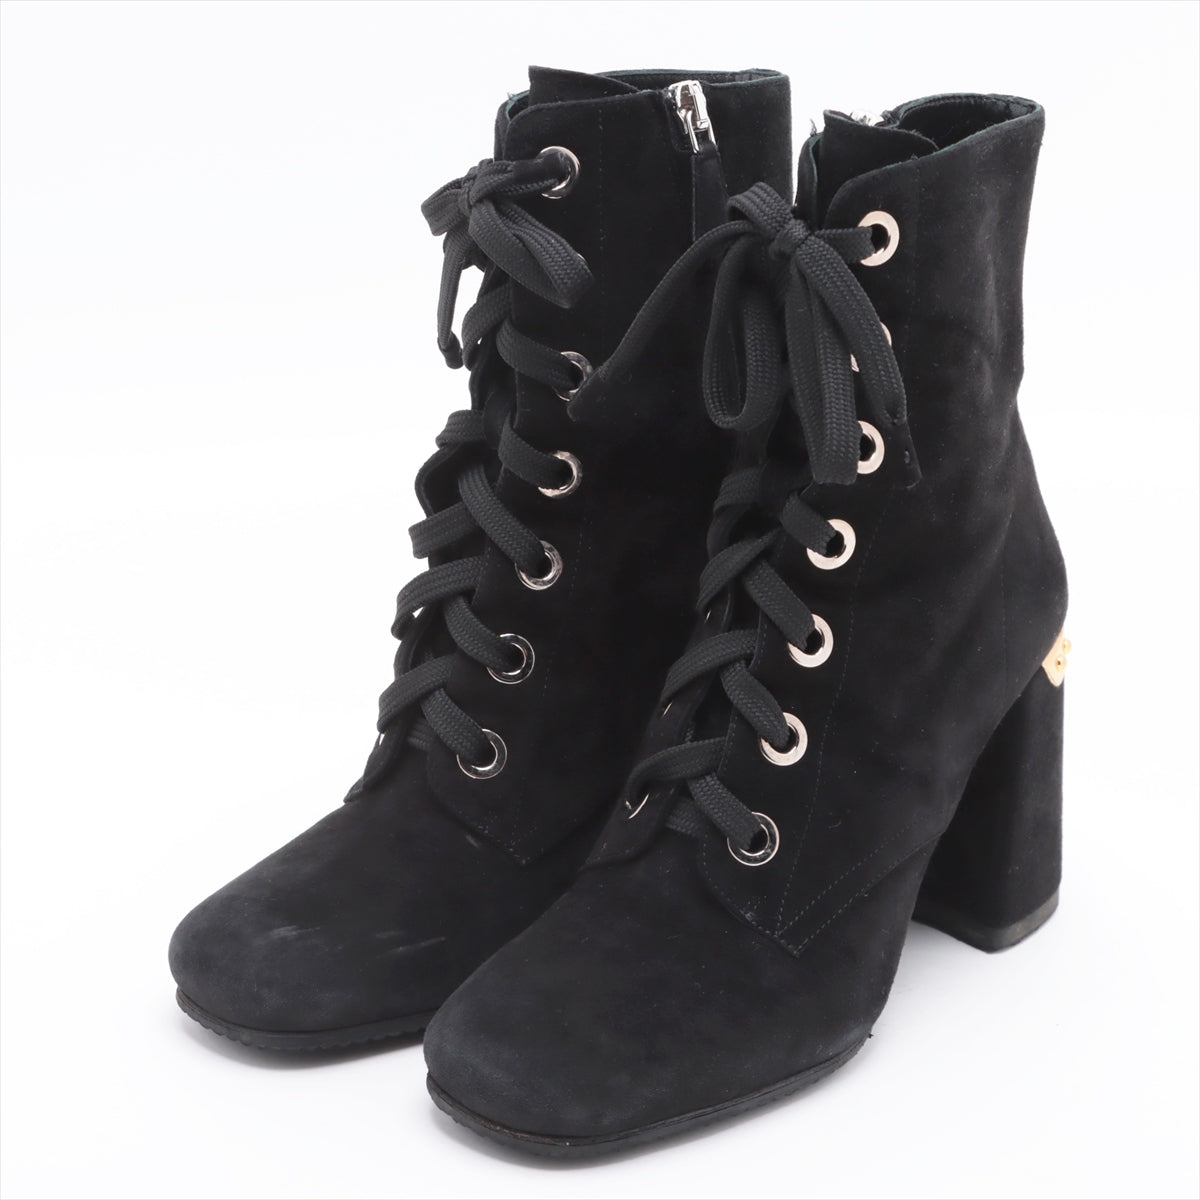 Prada Suede Boots 35 1/2 Ladies' Black Replacement Laces Included Lift repair